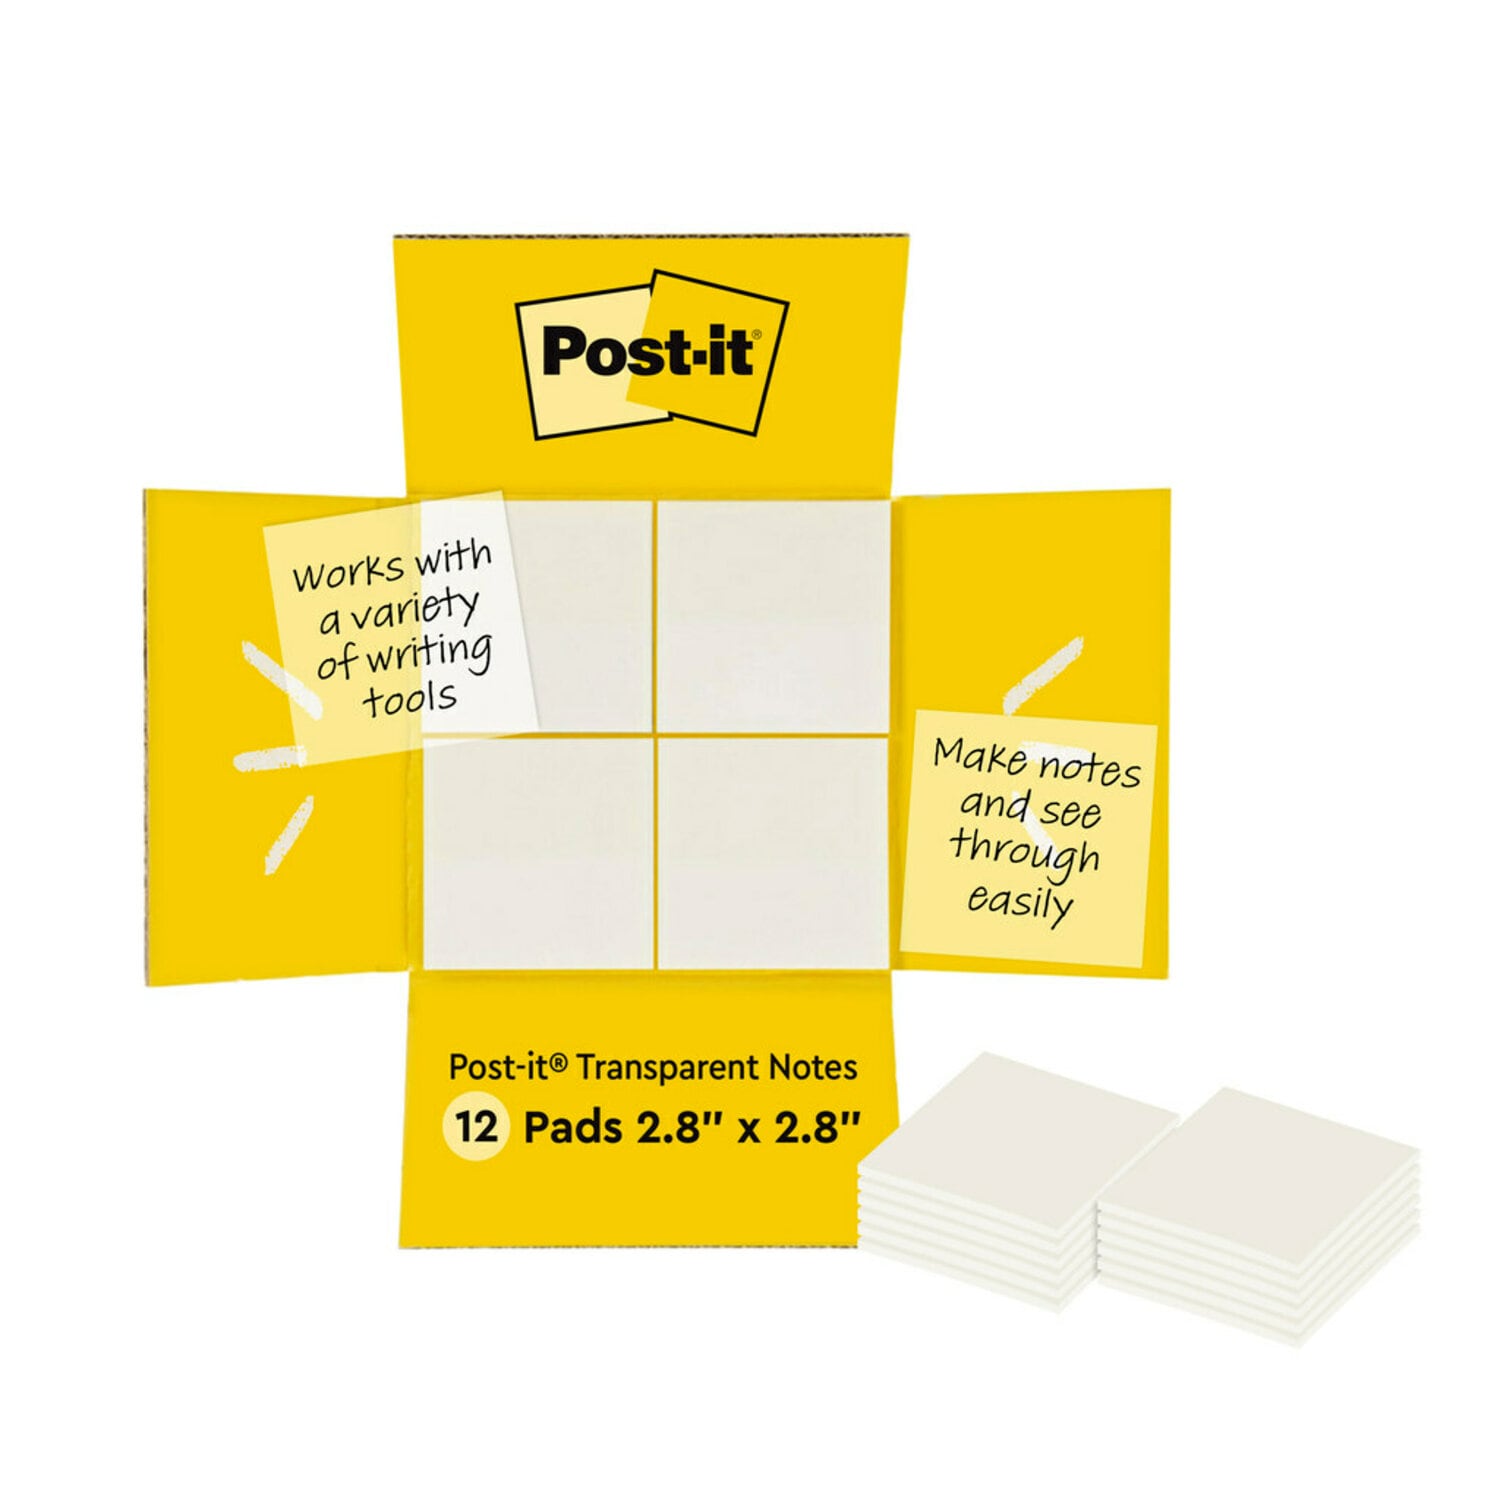 7100282601 - Post-it Transparent Notes 600-TRSPT-SIOC, 2-7/8 in x 2-7/8 in (73 mm x 73 mm)